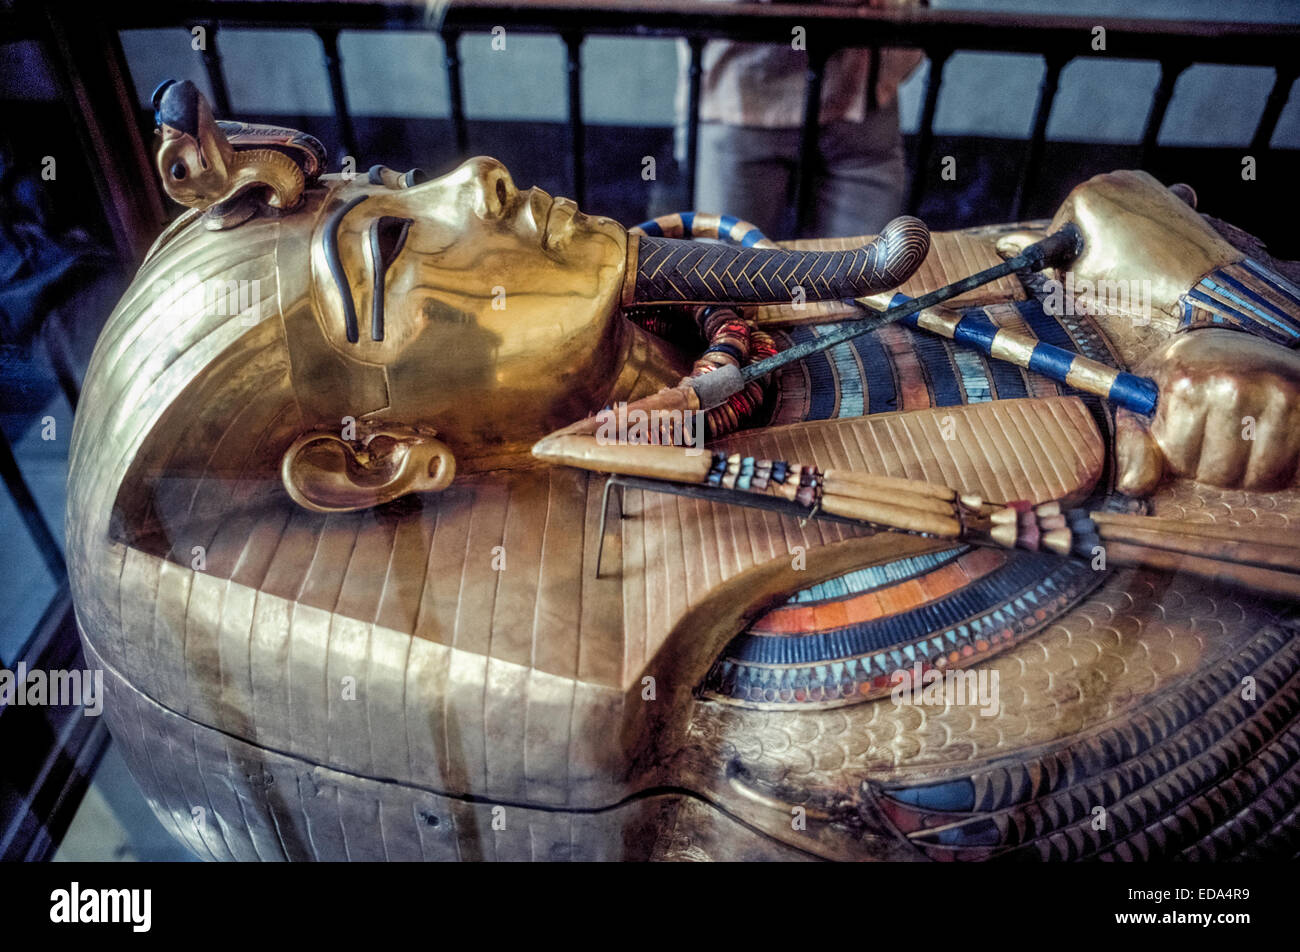 The sarcophagus (coffin) of the famed pharaoh Tutankhamun (King Tut) is on display at the Museum of Egyptian Antiquities in Cairo, Egypt. Stock Photo